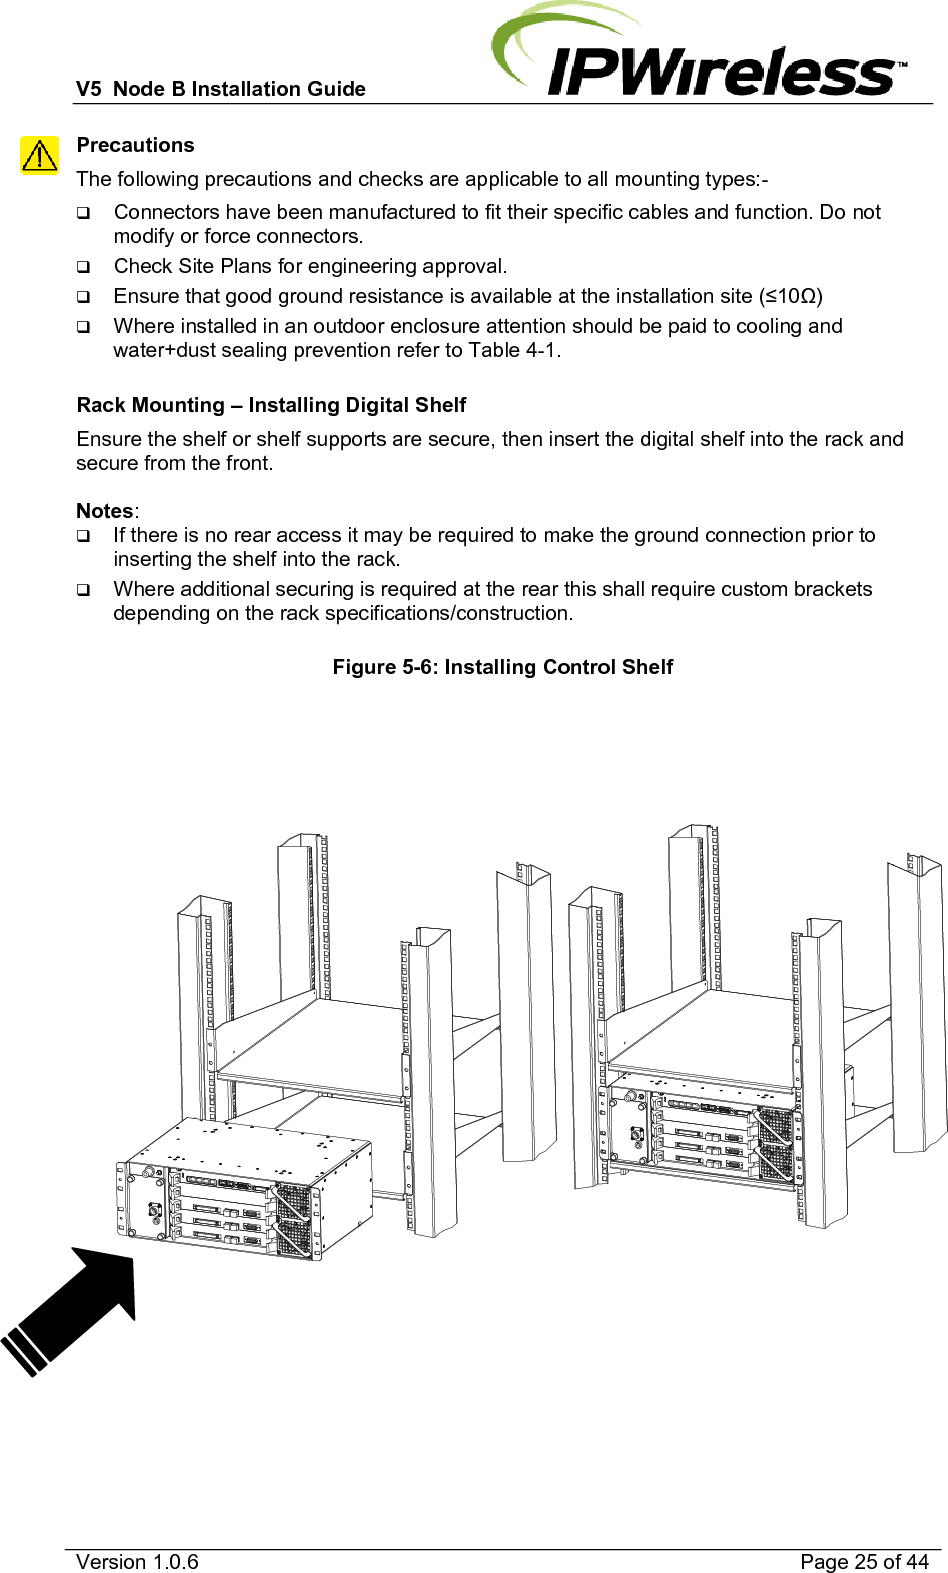 V5  Node B Installation Guide                           Version 1.0.6    Page 25 of 44 Precautions The following precautions and checks are applicable to all mounting types:-  Connectors have been manufactured to fit their specific cables and function. Do not modify or force connectors.  Check Site Plans for engineering approval.  Ensure that good ground resistance is available at the installation site (10)  Where installed in an outdoor enclosure attention should be paid to cooling and water+dust sealing prevention refer to Table 4-1.  Rack Mounting – Installing Digital Shelf Ensure the shelf or shelf supports are secure, then insert the digital shelf into the rack and secure from the front.  Notes:   If there is no rear access it may be required to make the ground connection prior to inserting the shelf into the rack.  Where additional securing is required at the rear this shall require custom brackets depending on the rack specifications/construction.  Figure 5-6: Installing Control Shelf              